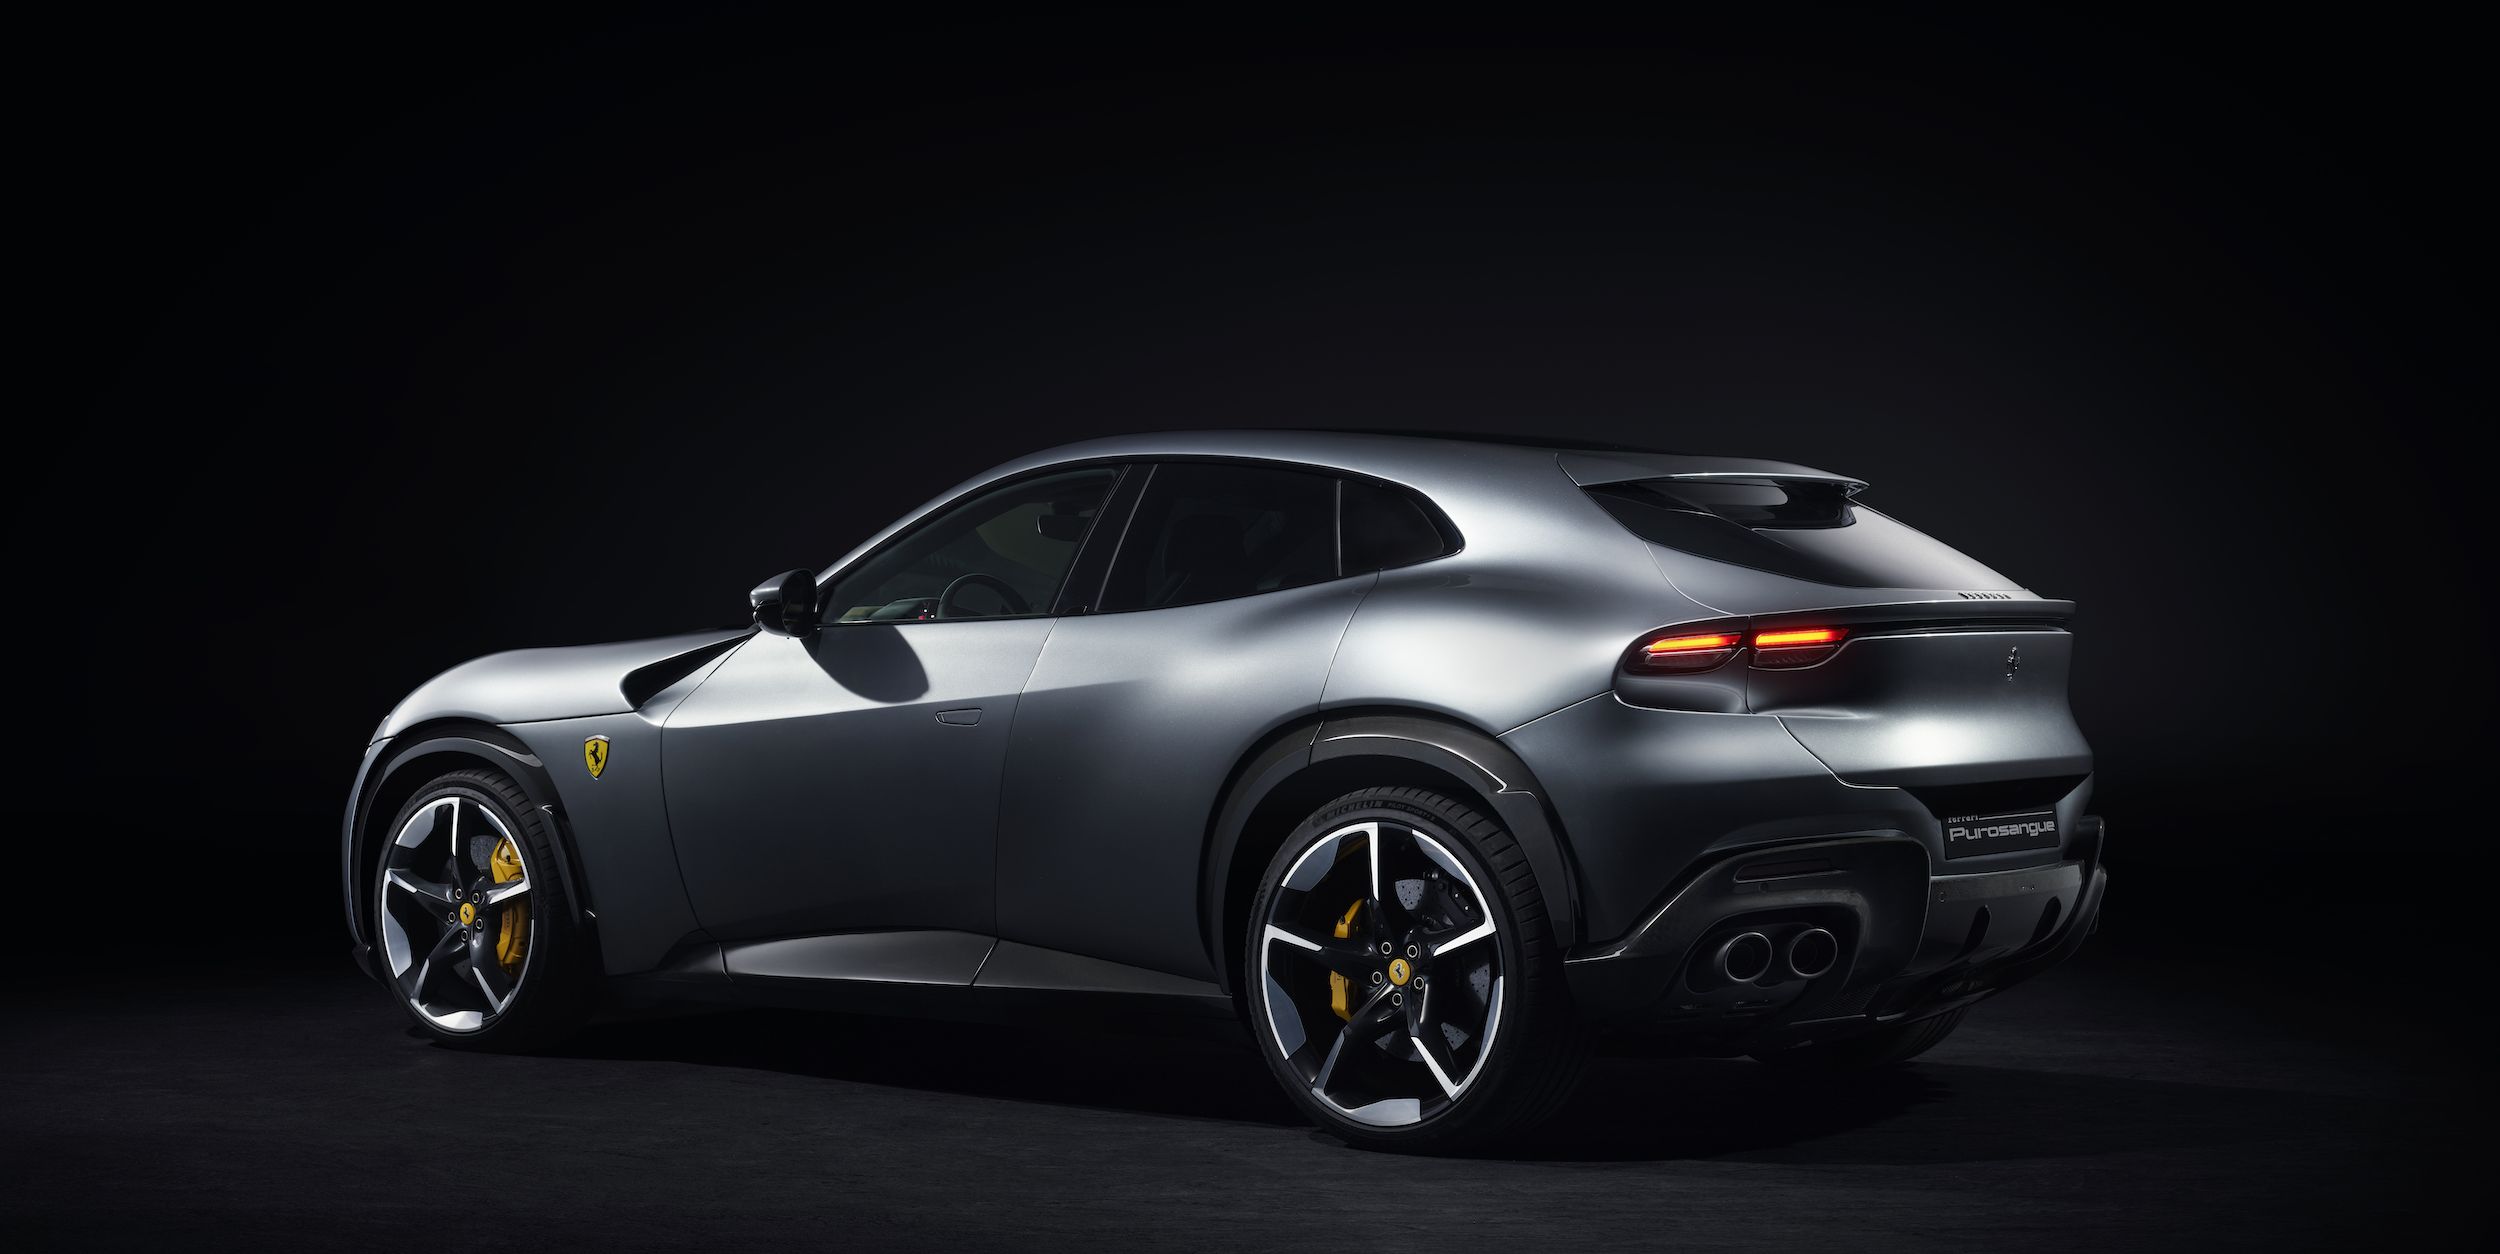 The Ferrari Crossover Is Here With Suicide Doors and a 715-HP V-12